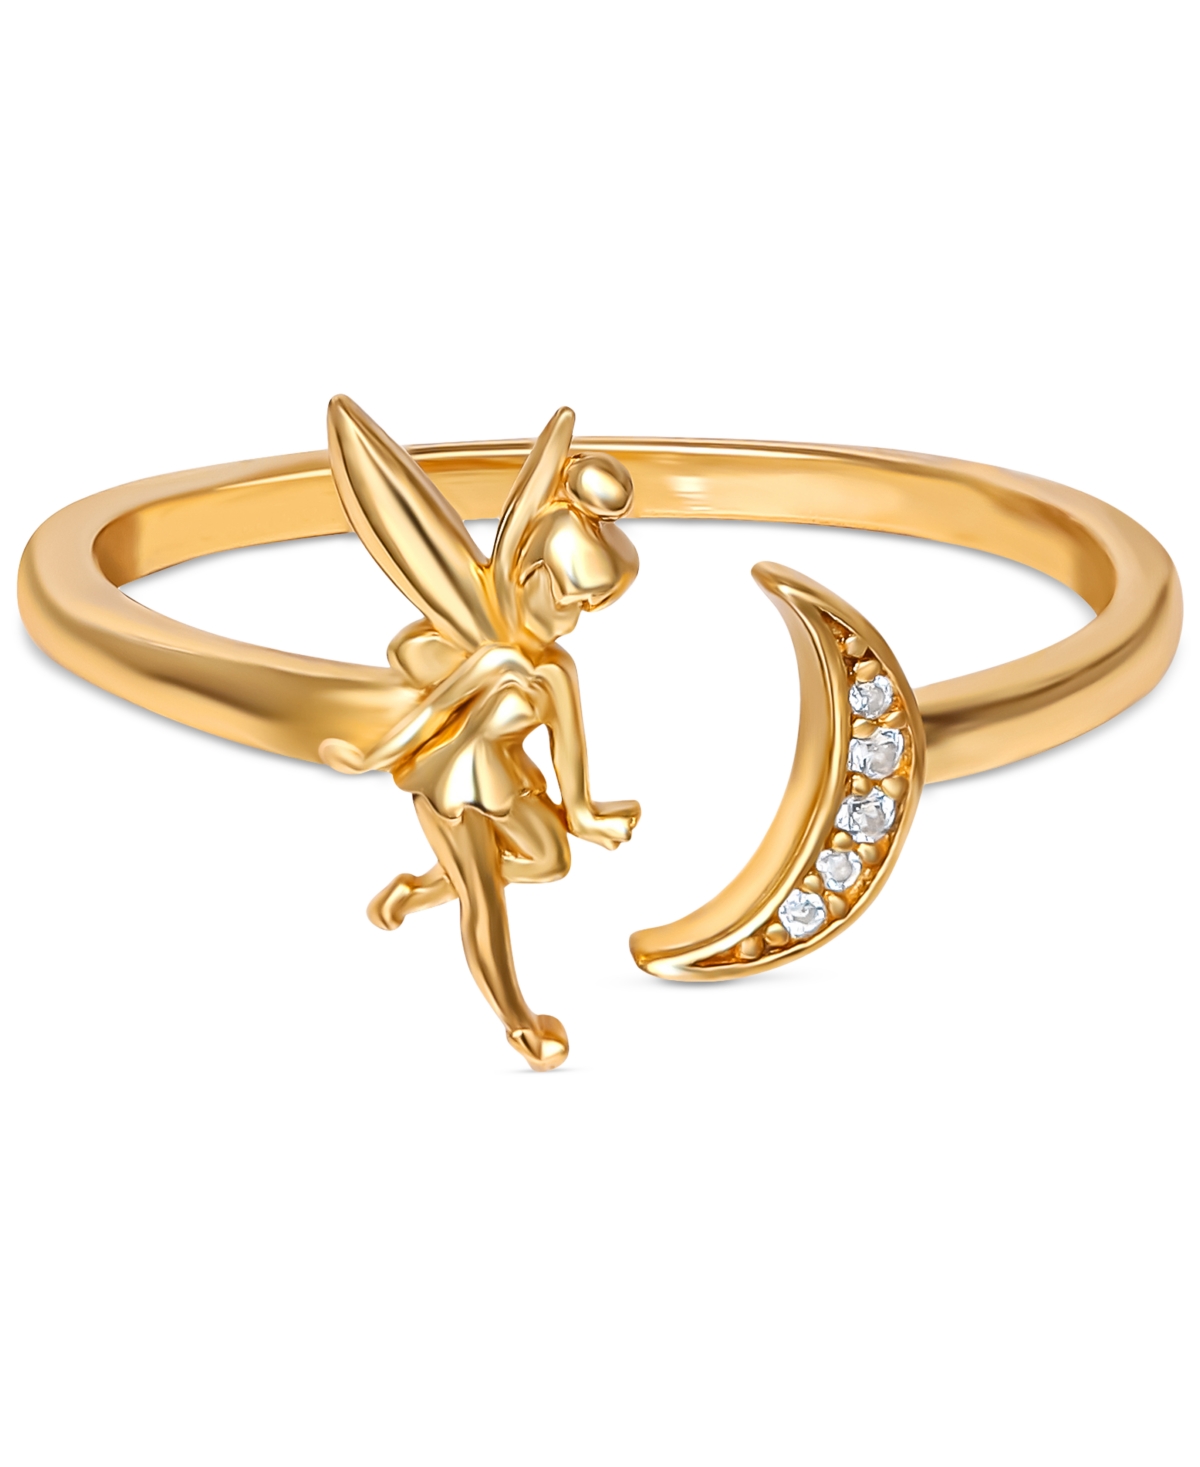 Cubic Zirconia Tinkerbell Moon Cuff Ring in 18k Gold-Plated Sterling Silver - Gold Over Silver